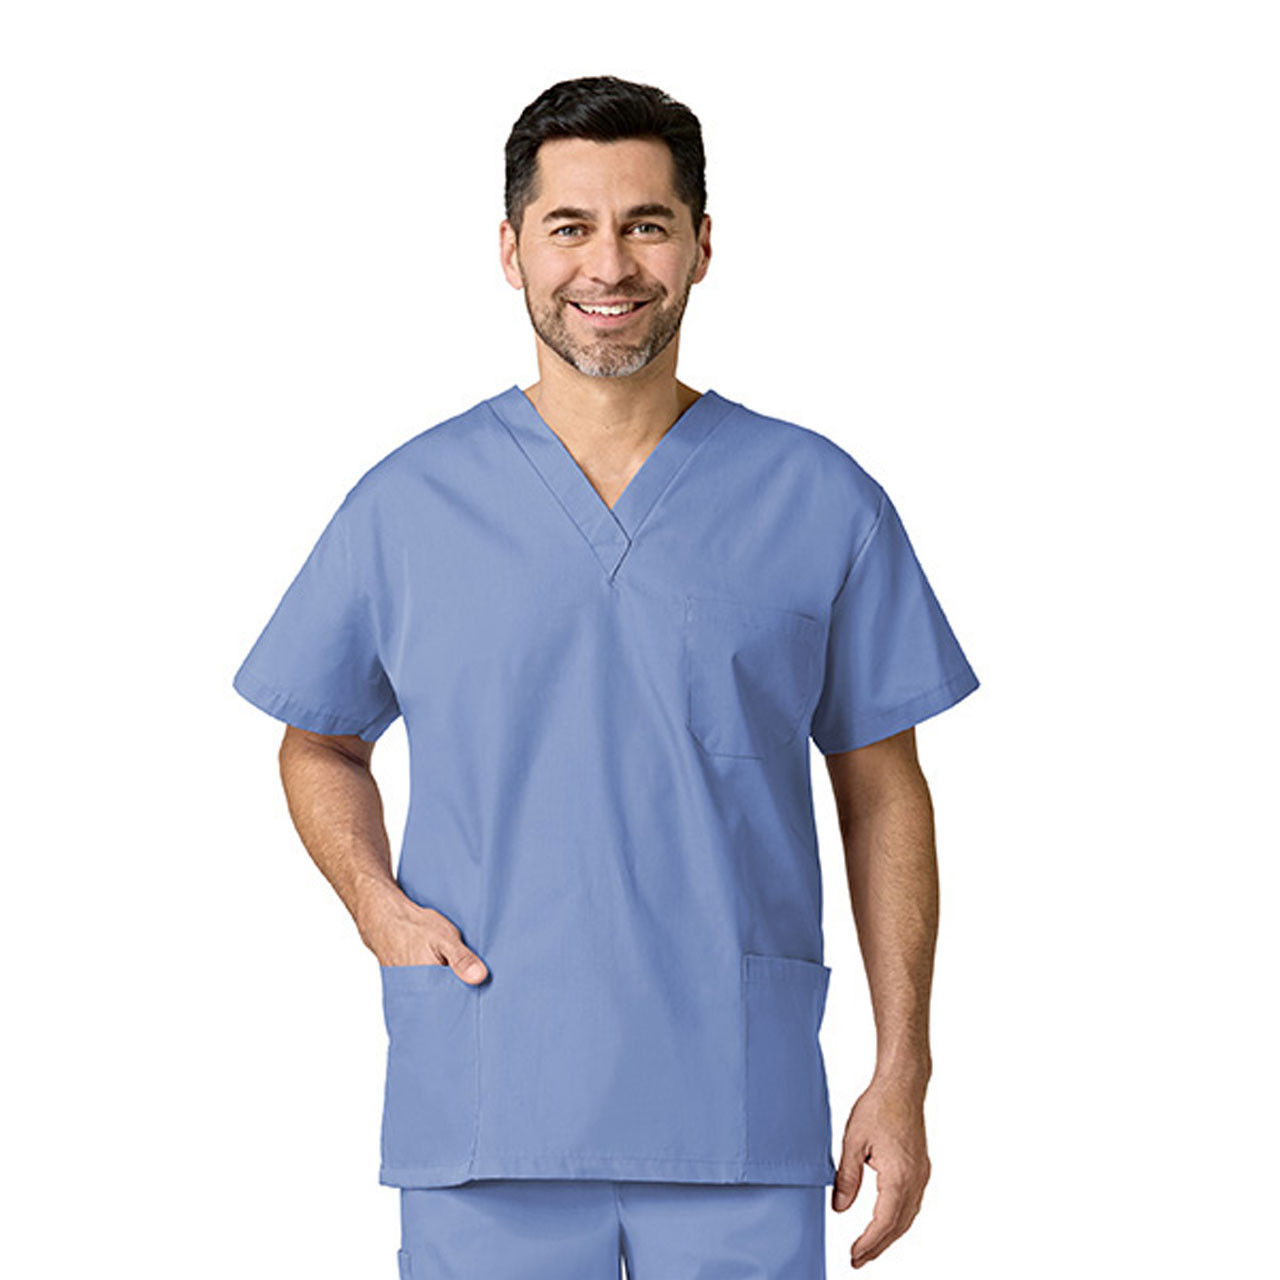 What material are the scrub tops made from?